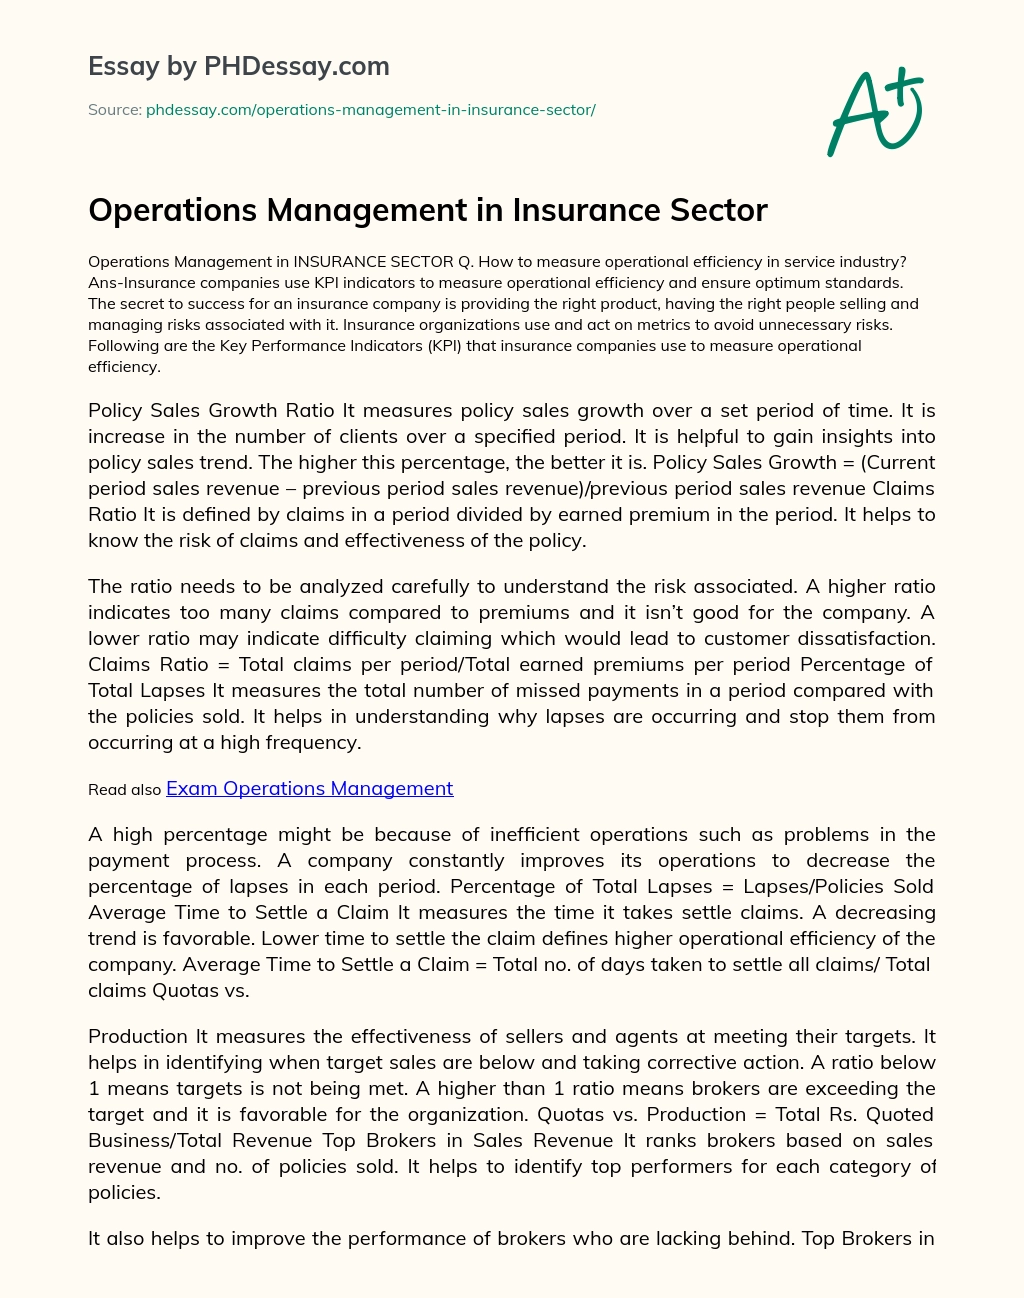 Operations Management in Insurance Sector essay